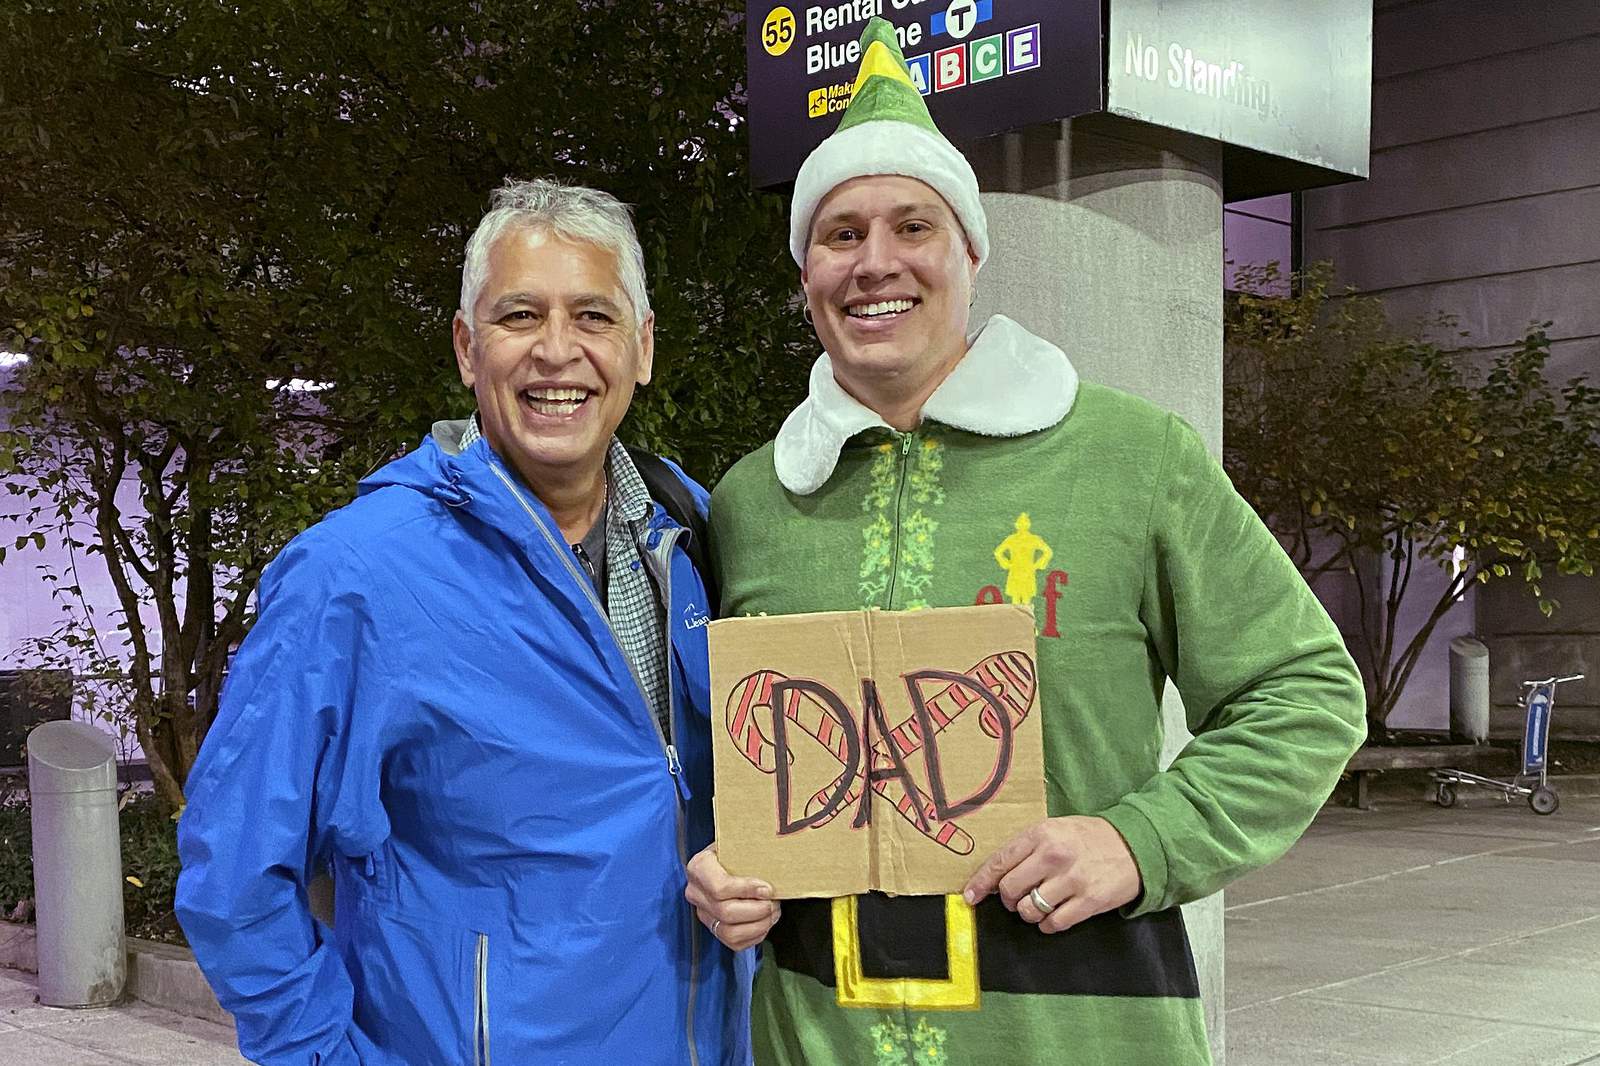 Scene from ‘Elf’ comes to life as Buddy meets dad in Boston